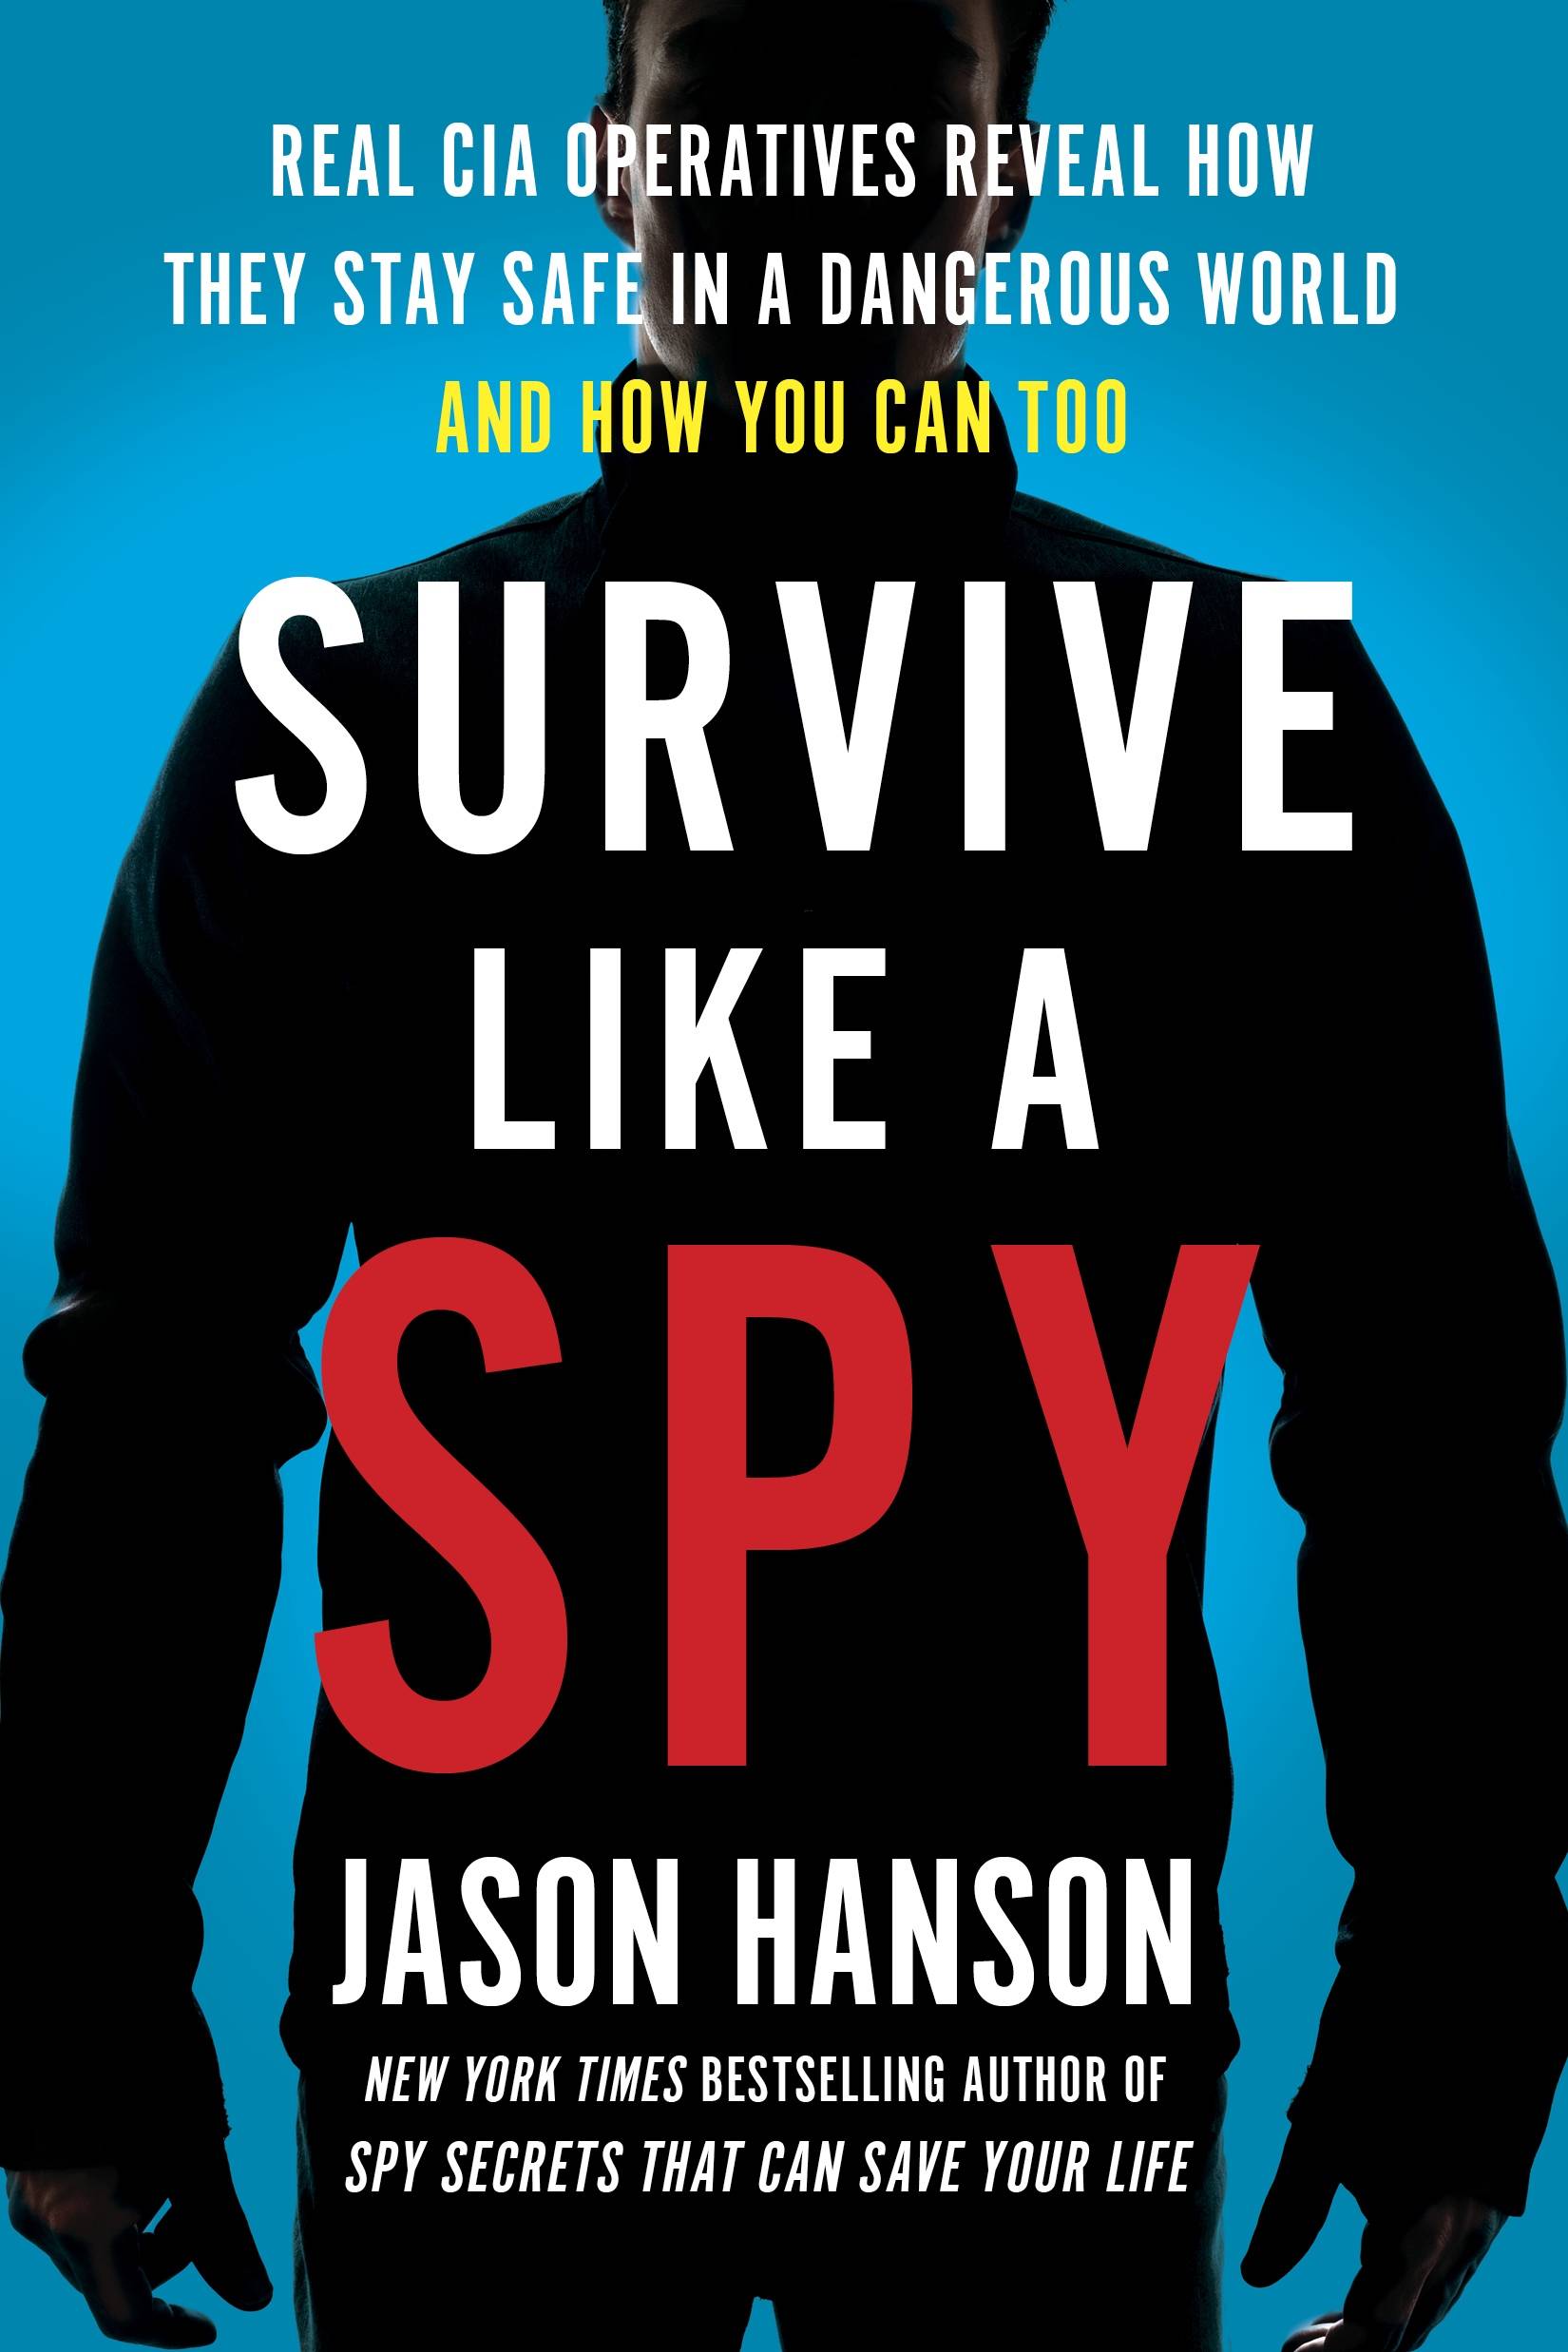 The Bookworm Sez: Put your spy kills to work in real life